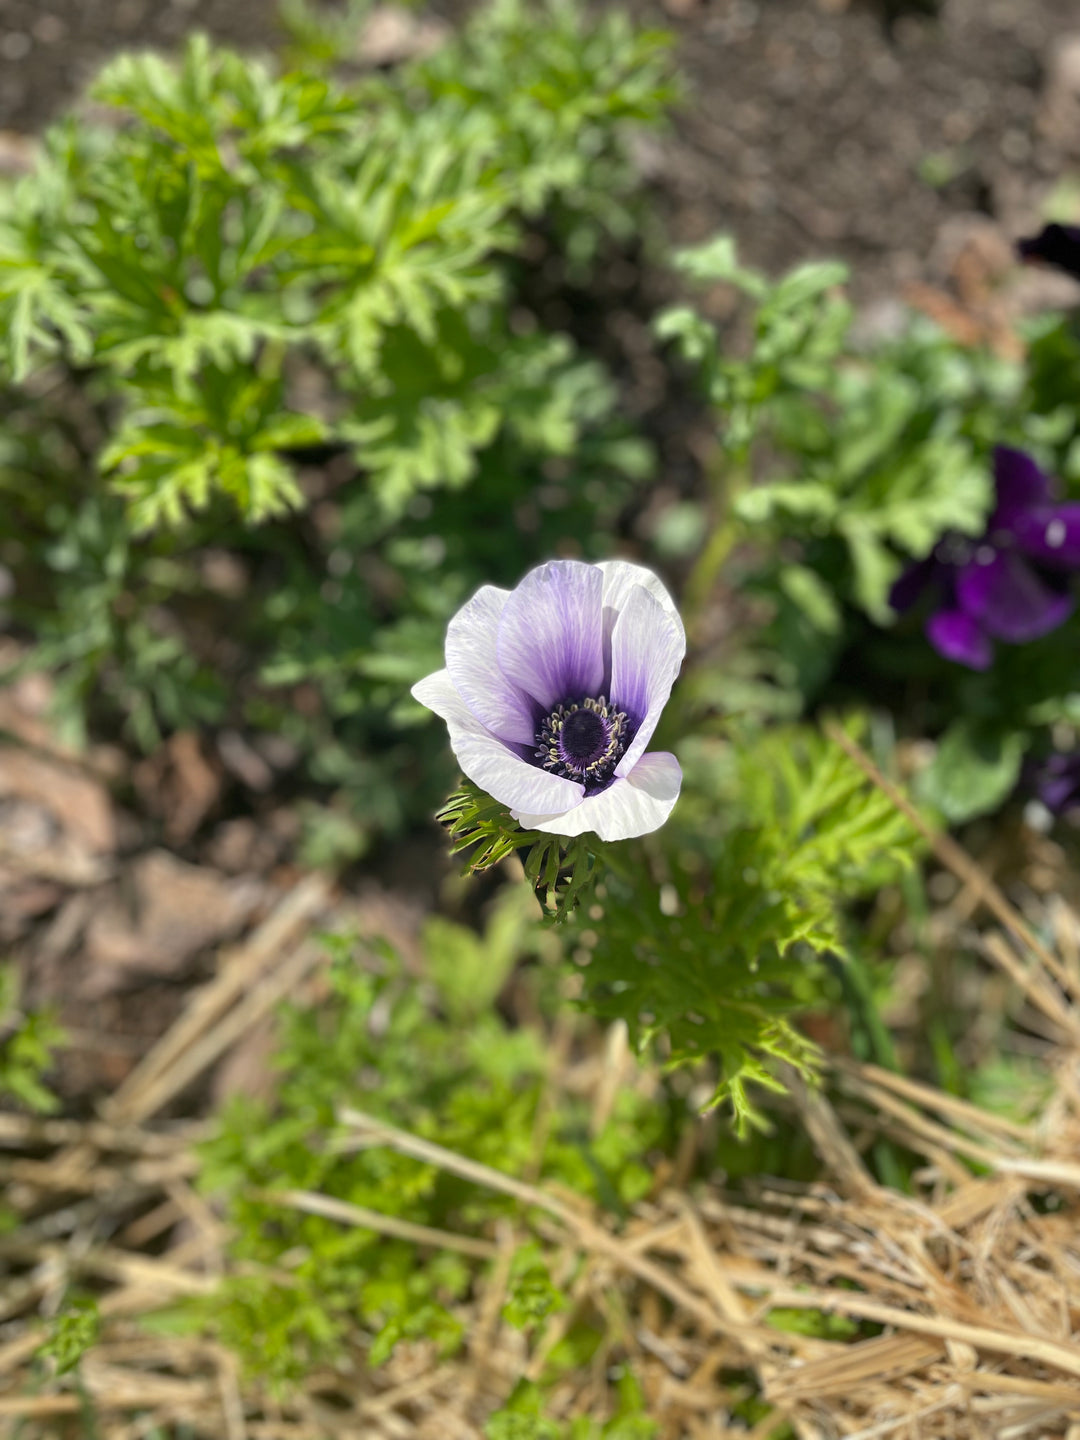 Single Azzurro Mistral Plus Anemone bloom in process of blooming. White edged petals with periwinkle mids fading to dark blue.